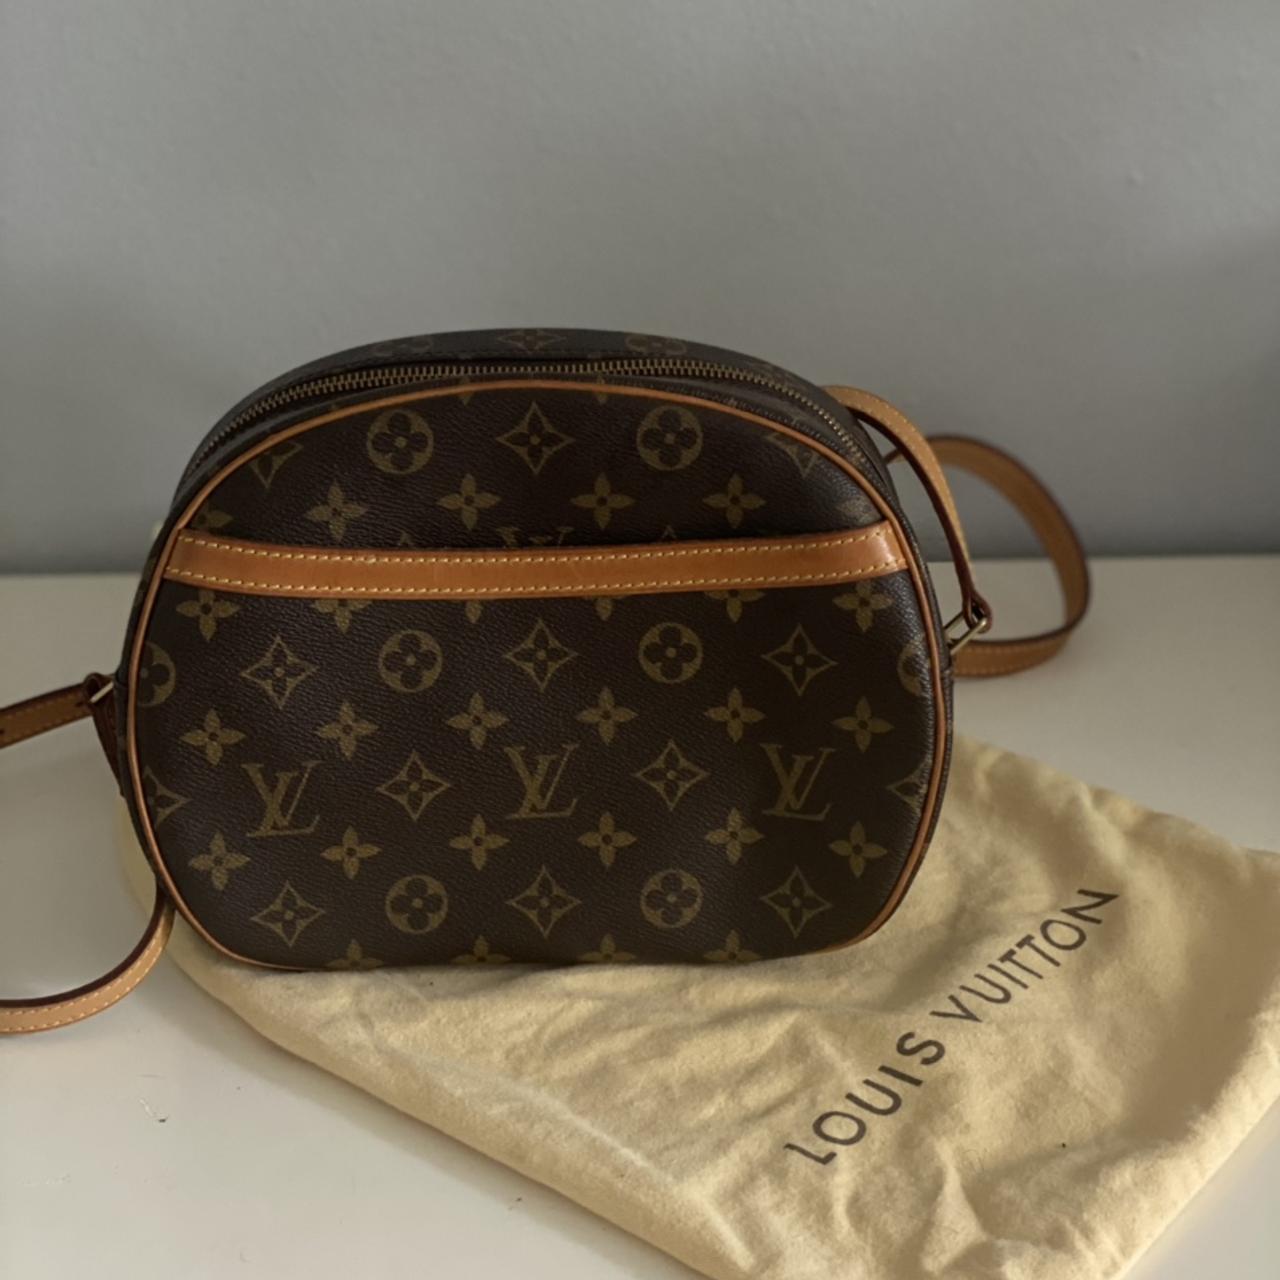 Authentic Louis Vuitton handbag, very gently used. Near perfect condition